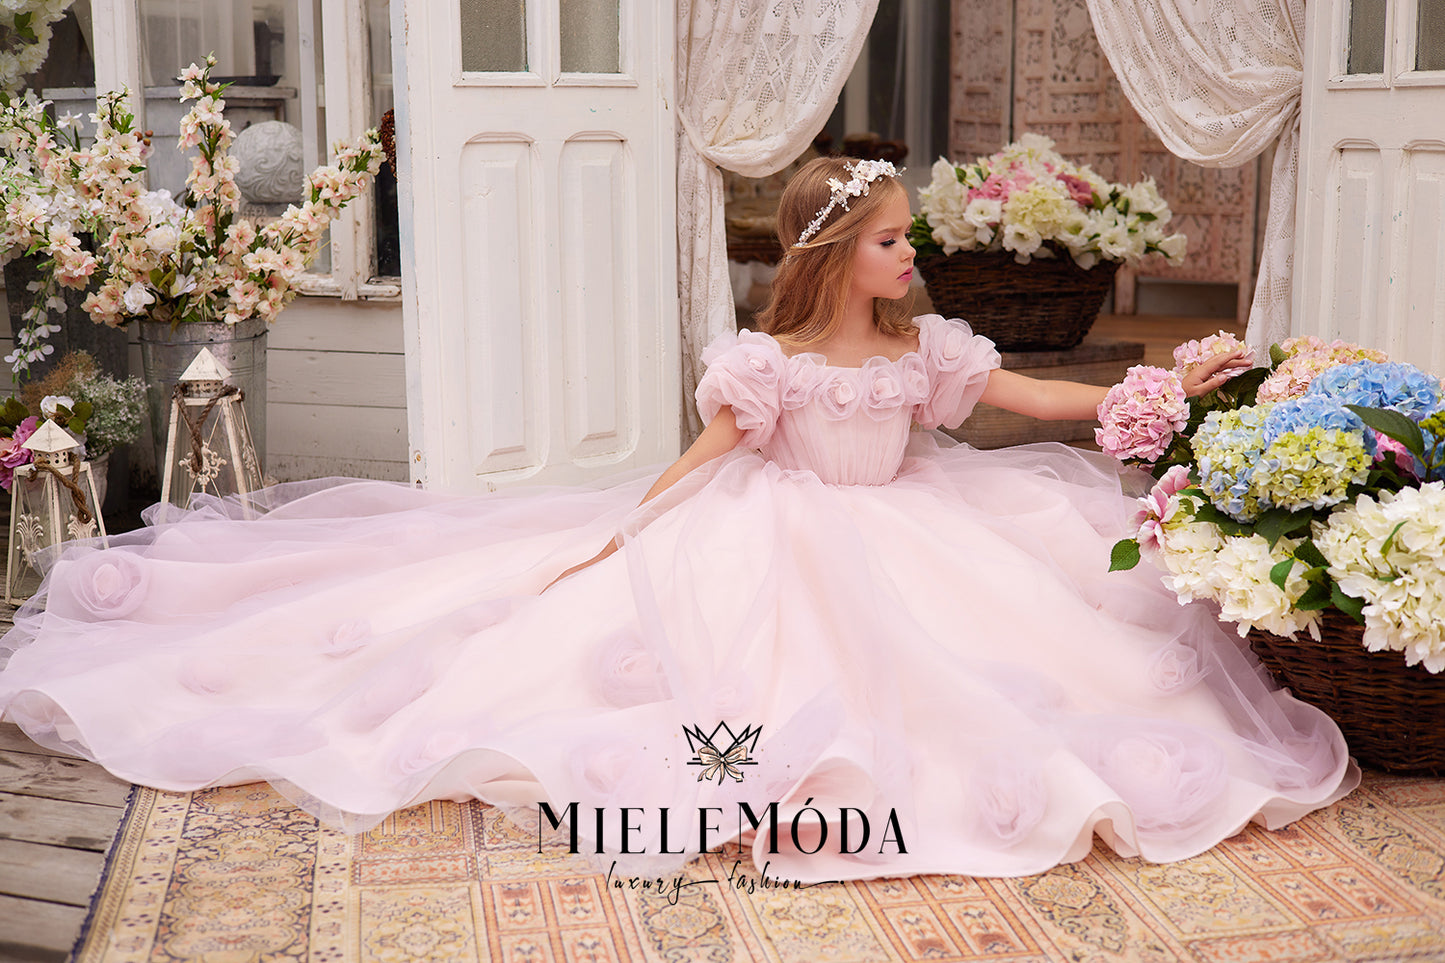 pretty flower girl wearing pink tulle dress with 3d flowers and pearl floral headpiece sitting in front of doors surrounded by flower baskets